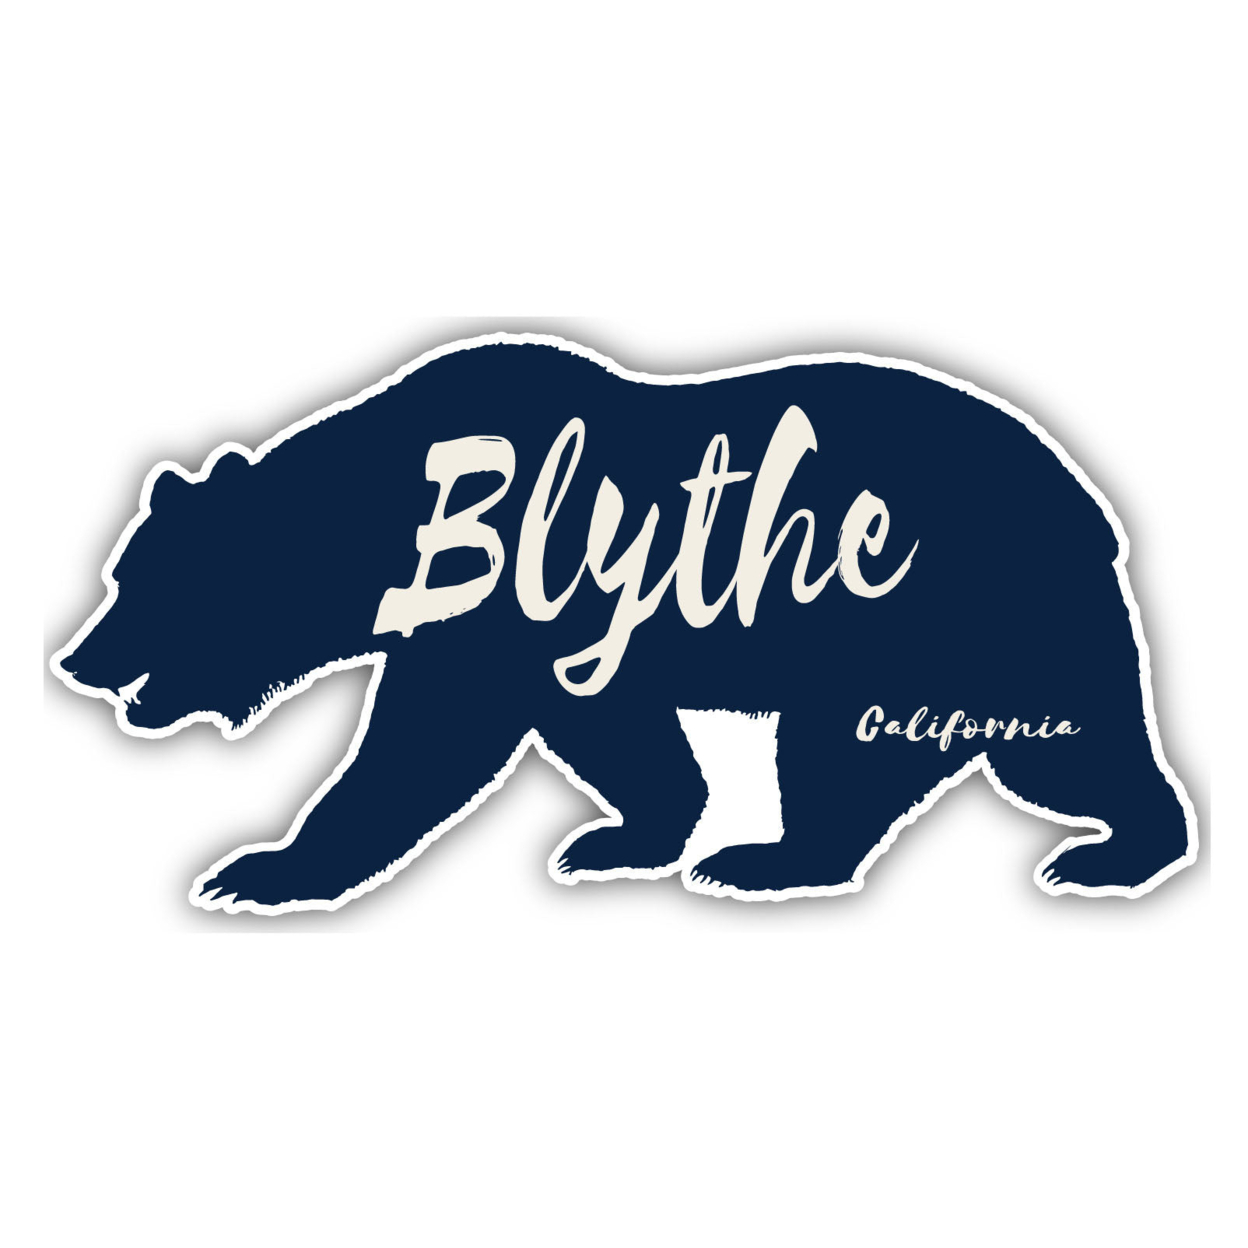 Blythe California Souvenir Decorative Stickers (Choose Theme And Size) - 4-Pack, 8-Inch, Bear